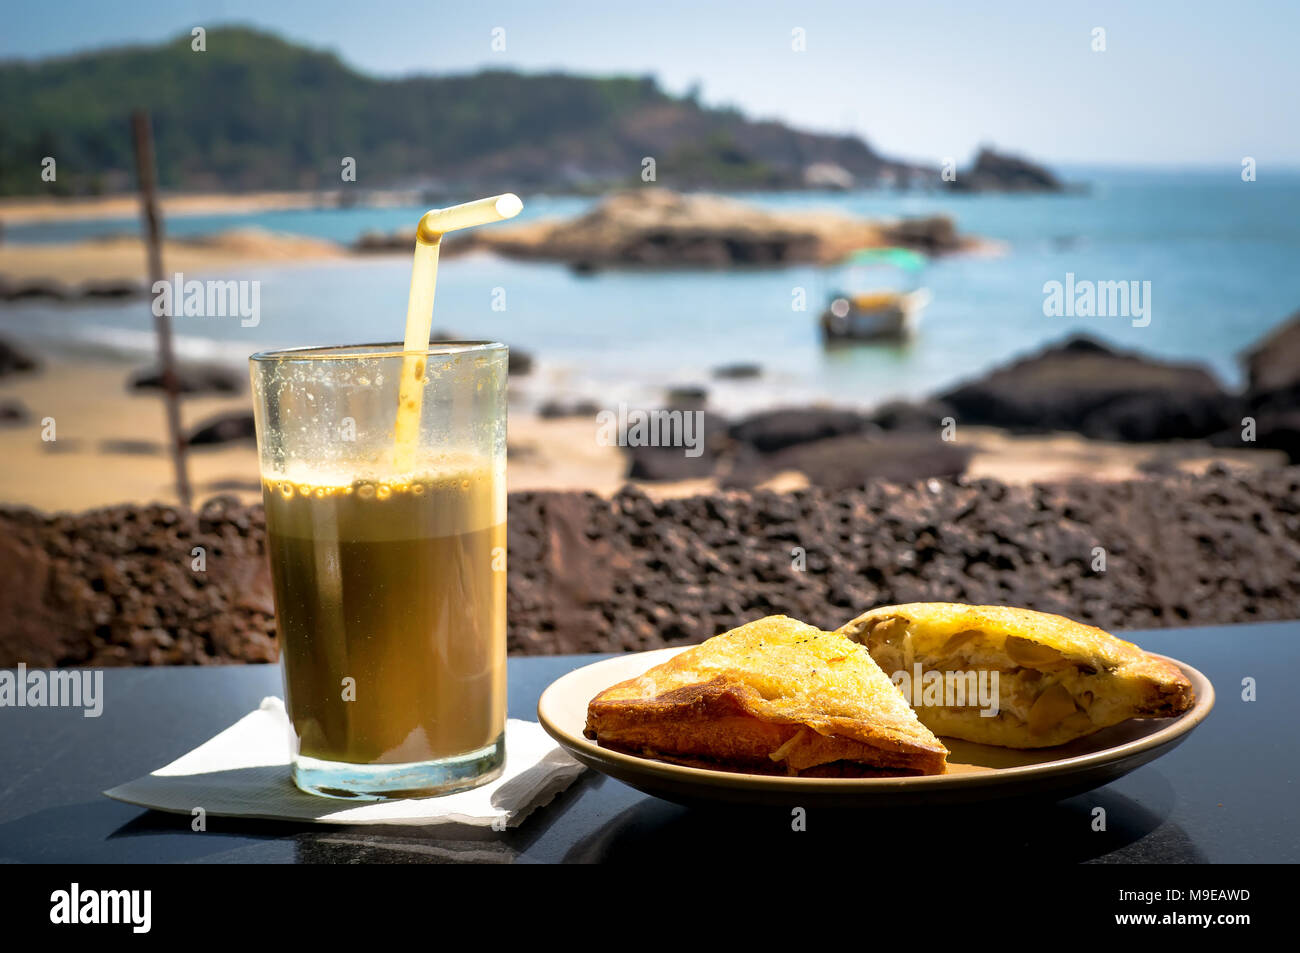 Breakfast on the beach. A sandwich and a coffee cocktail on the table in the restaurant on background of the sea on a hot Sunny day. Stock Photo